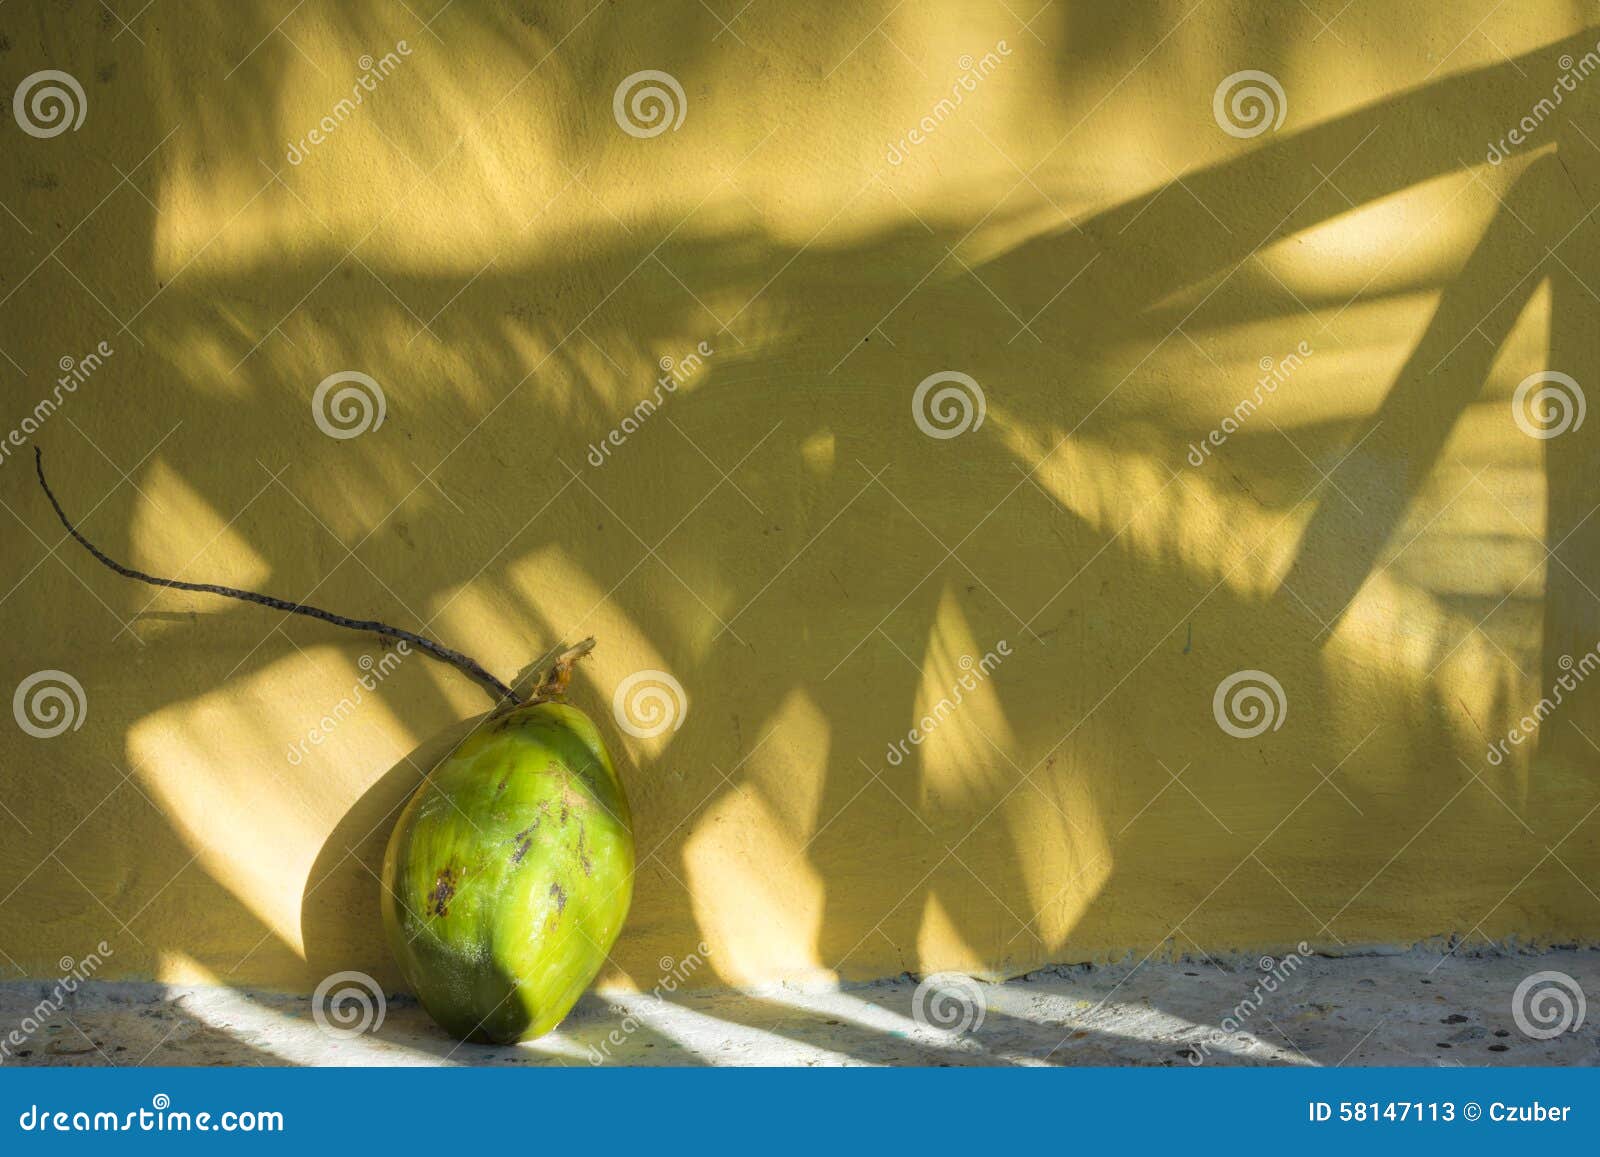 http://thumbs.dreamstime.com/z/coconut-shadows-tropics-big-green-husk-stem-next-to-yellow-exterior-wall-tropical-palm-fronds-copy-space-58147113.jpg